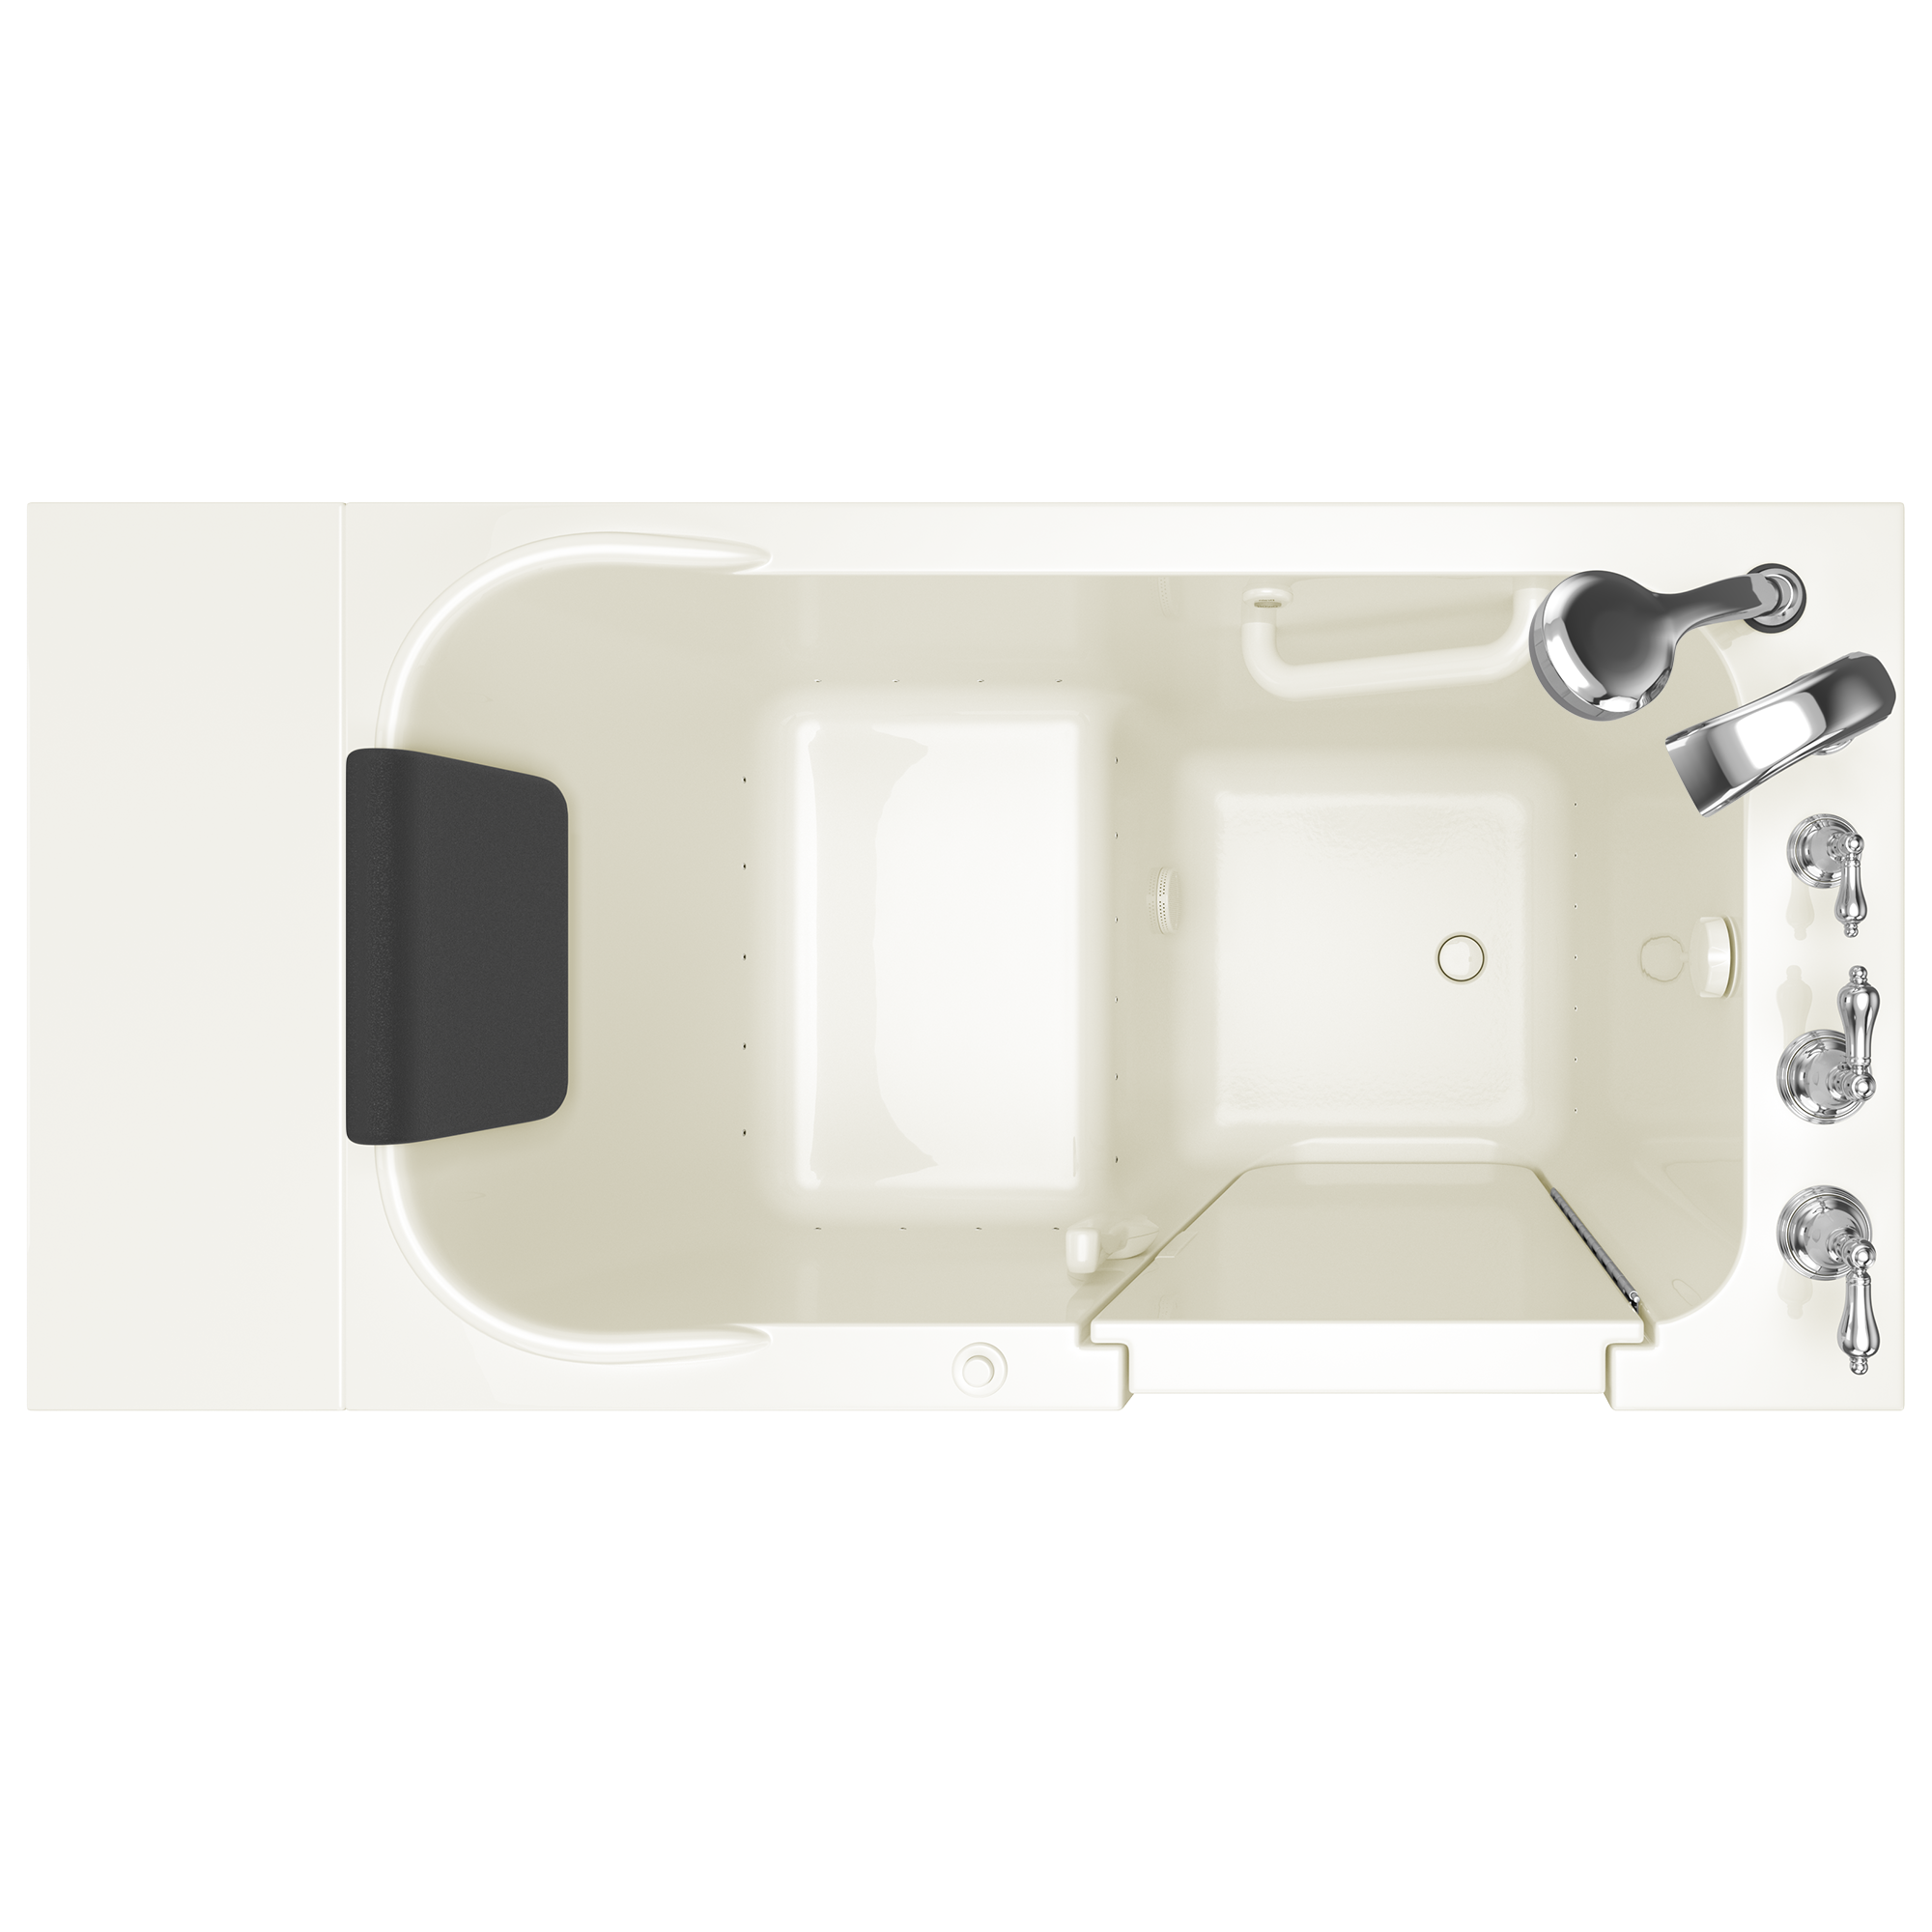 Gelcoat Premium Series 28 x 48-Inch Walk-in Tub With Air Spa System - Right-Hand Drain With Faucet